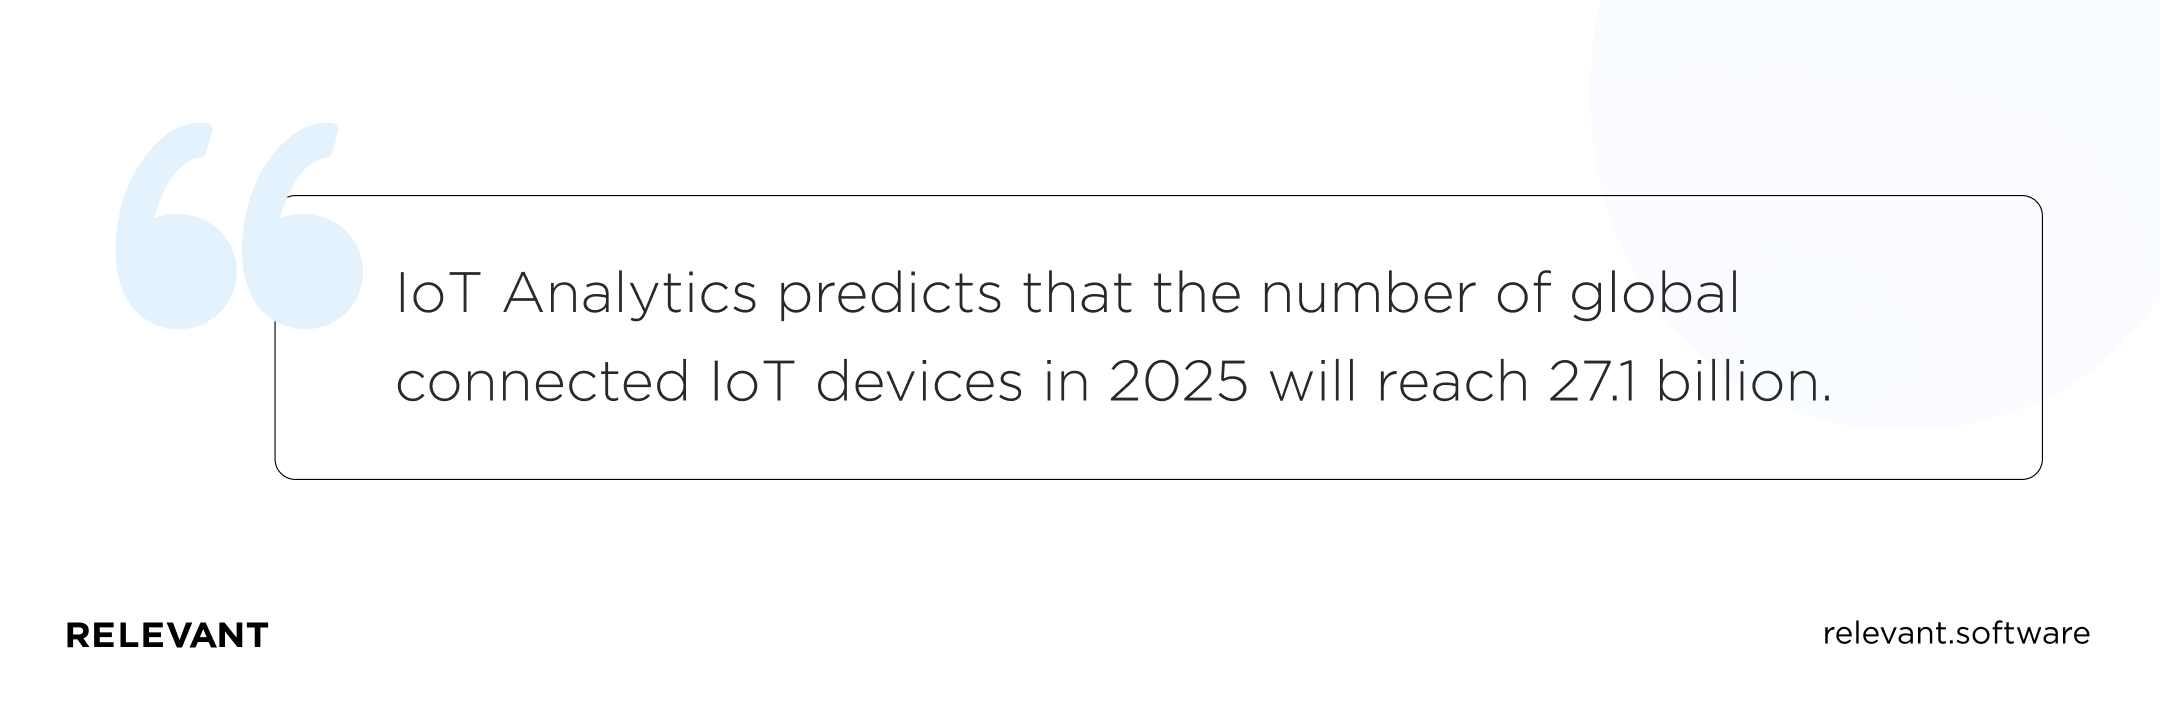 IoT Analytics predicts that the number of global connected IoT devices in 2025 will reach 27.1 billion.